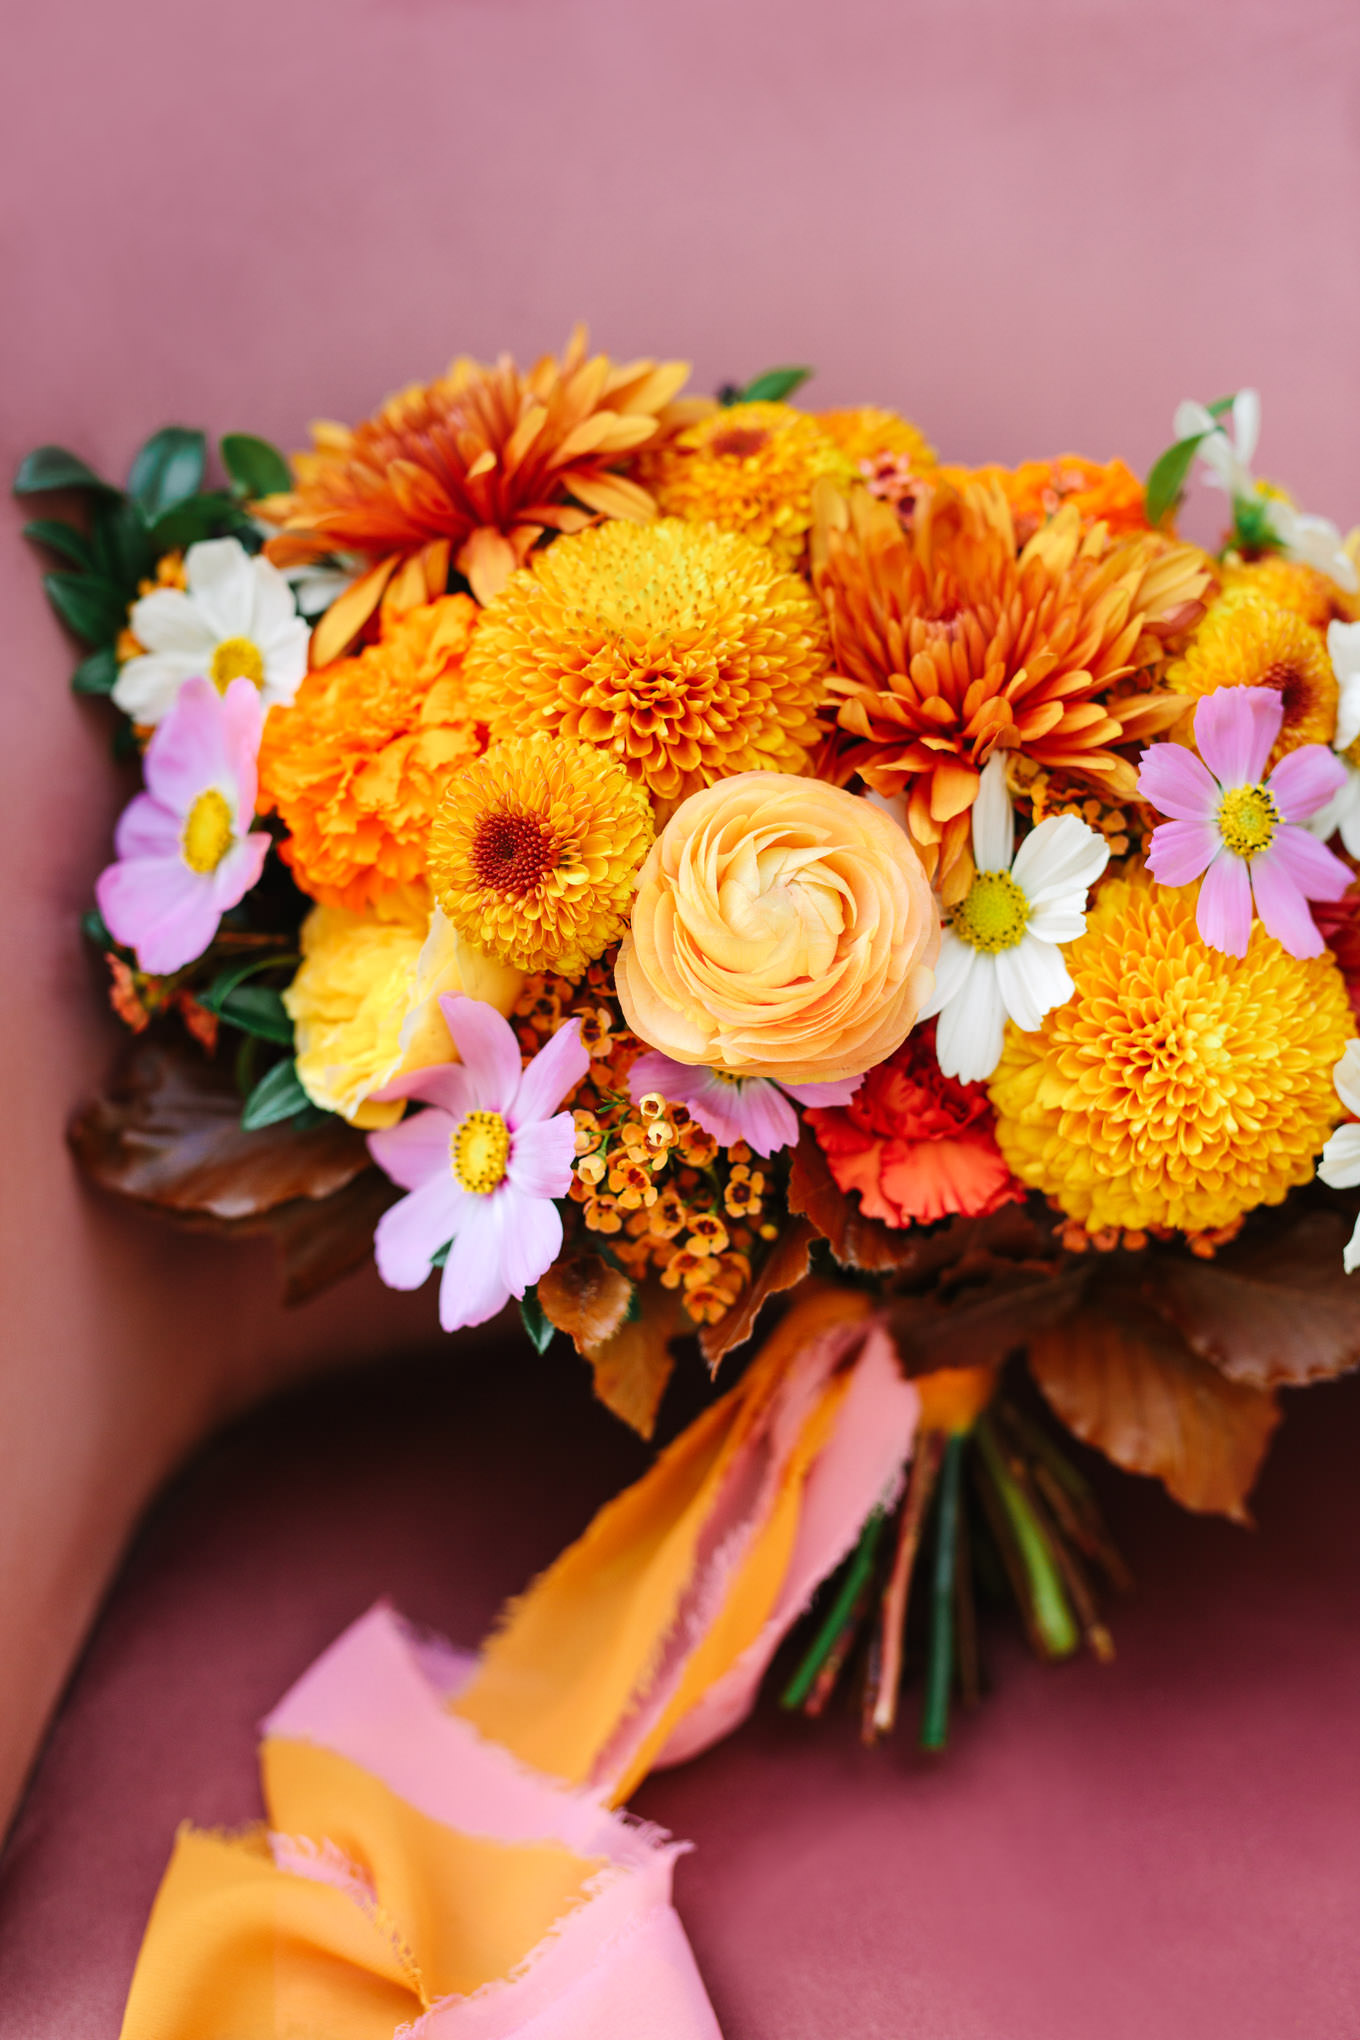 Orange, pink, white floral bouquet | Vibrant backyard micro wedding featured on Green Wedding Shoes | Colorful LA wedding photography | #losangeleswedding #backyardwedding #microwedding #laweddingphotographer Source: Mary Costa Photography | Los Angeles